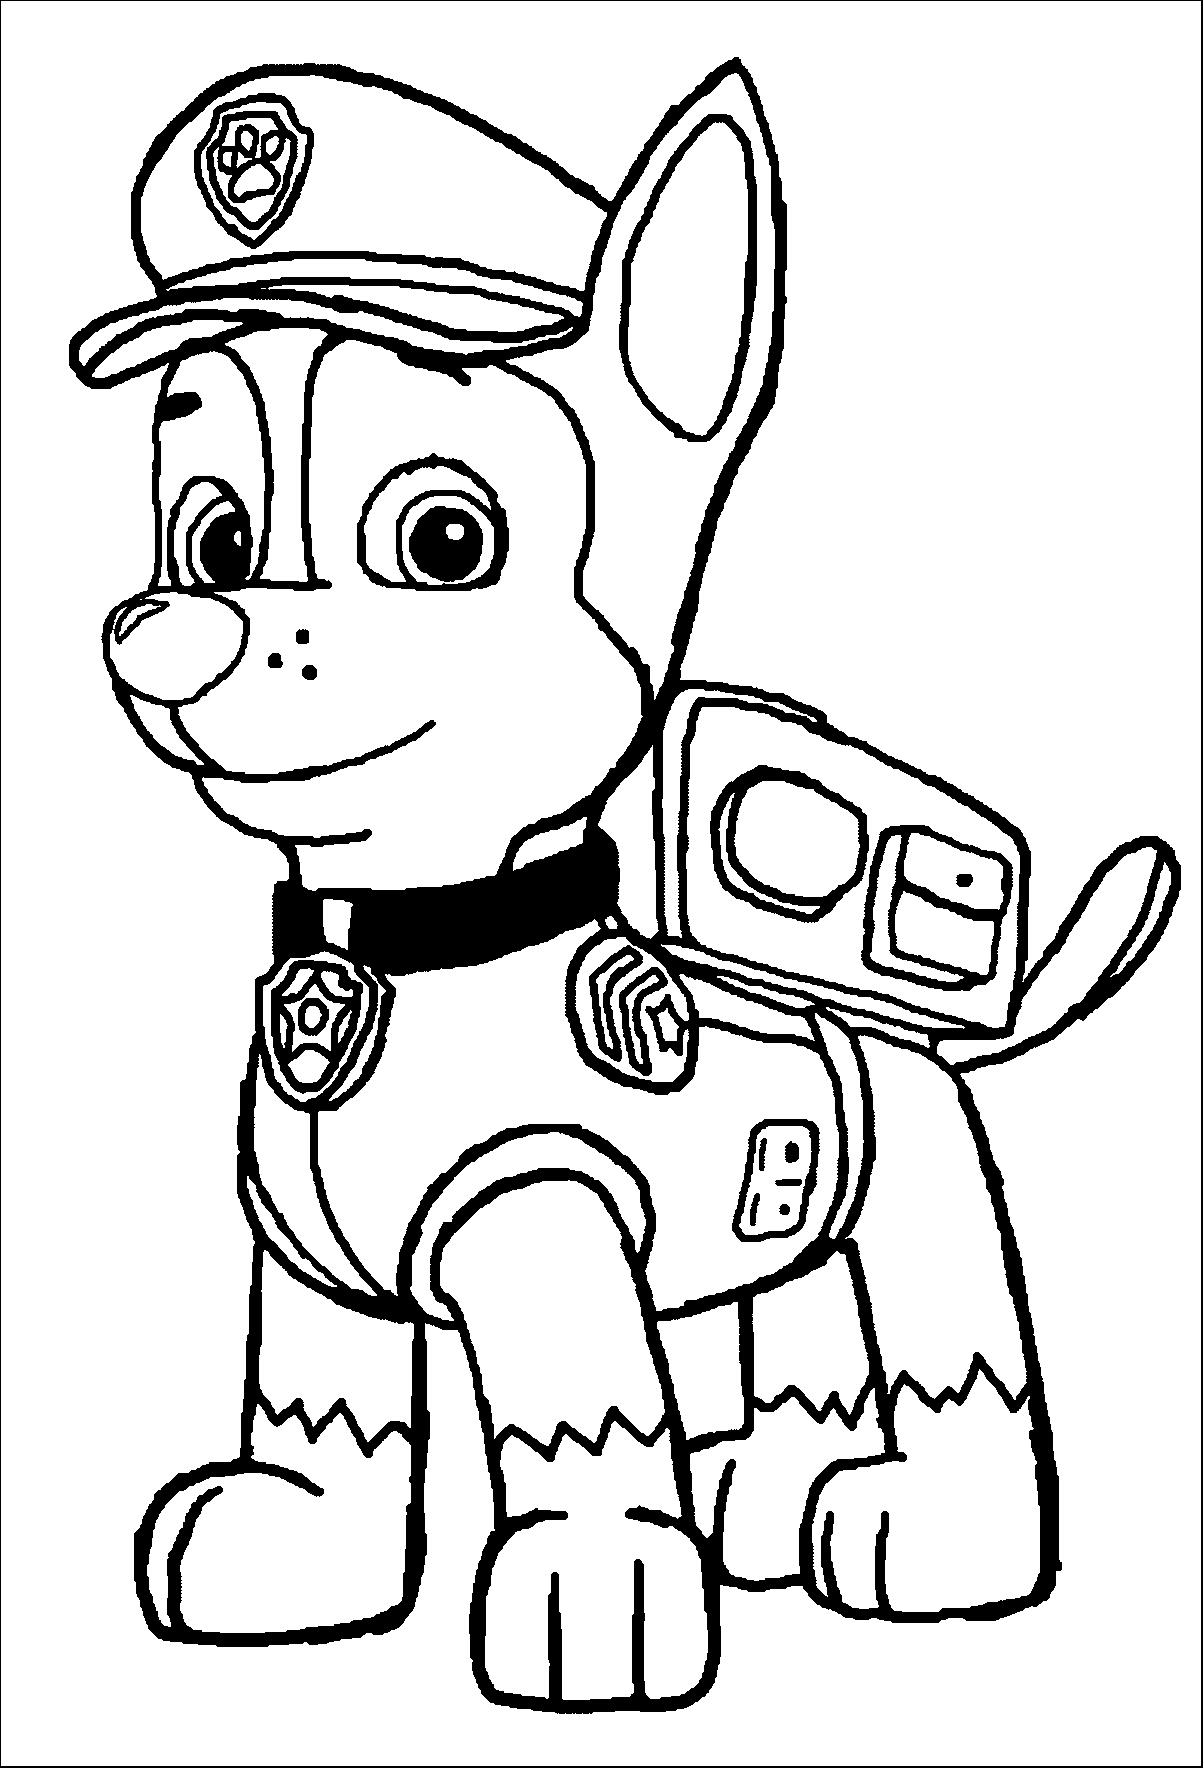 Paw Patrol Coloring Pages Chase Archives Free Coloring Page